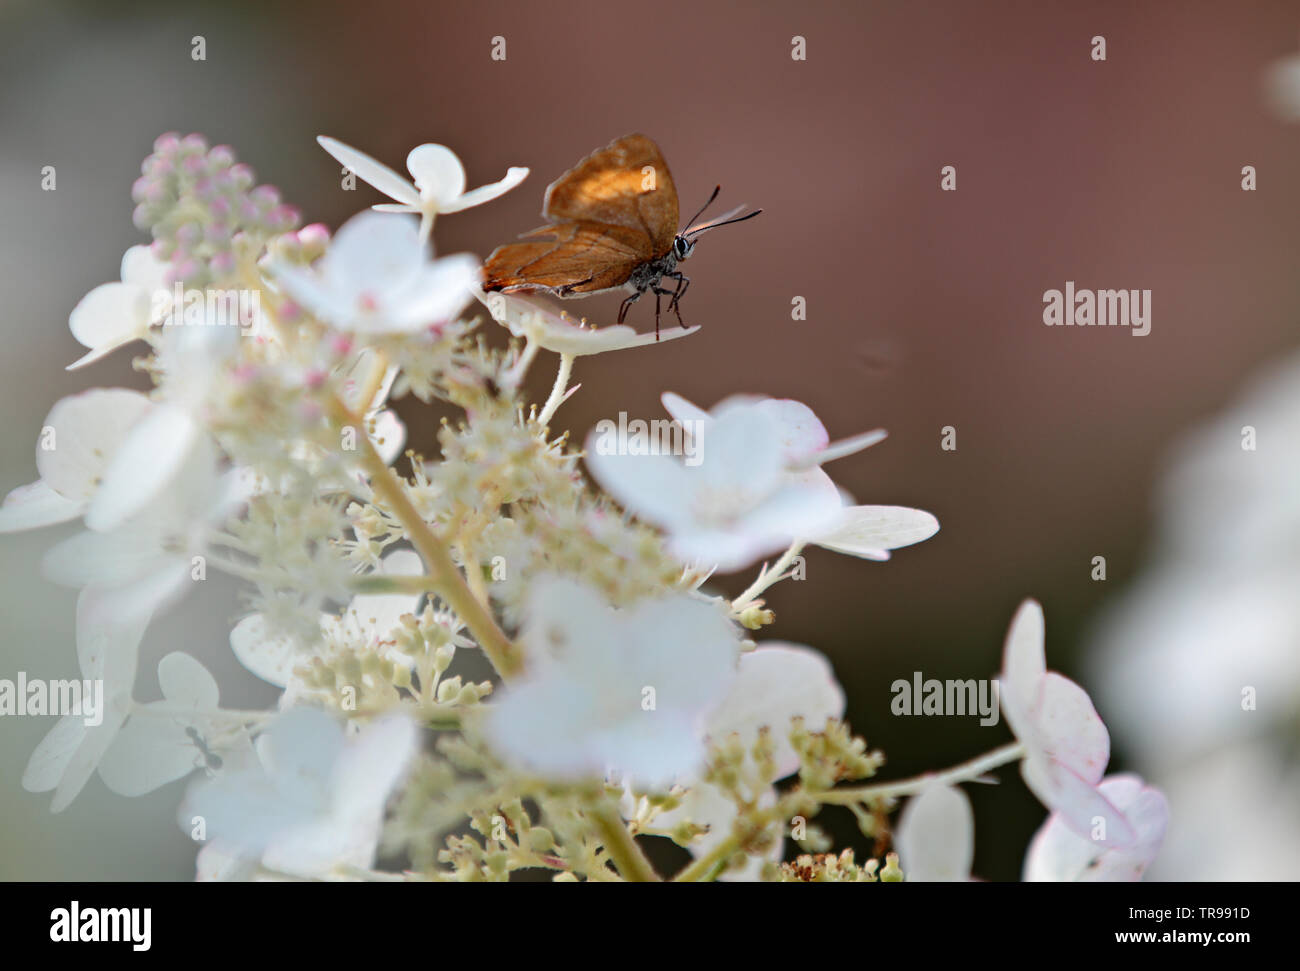 A small brown butterfly on a branch of a hydrangea on bright summer light Stock Photo